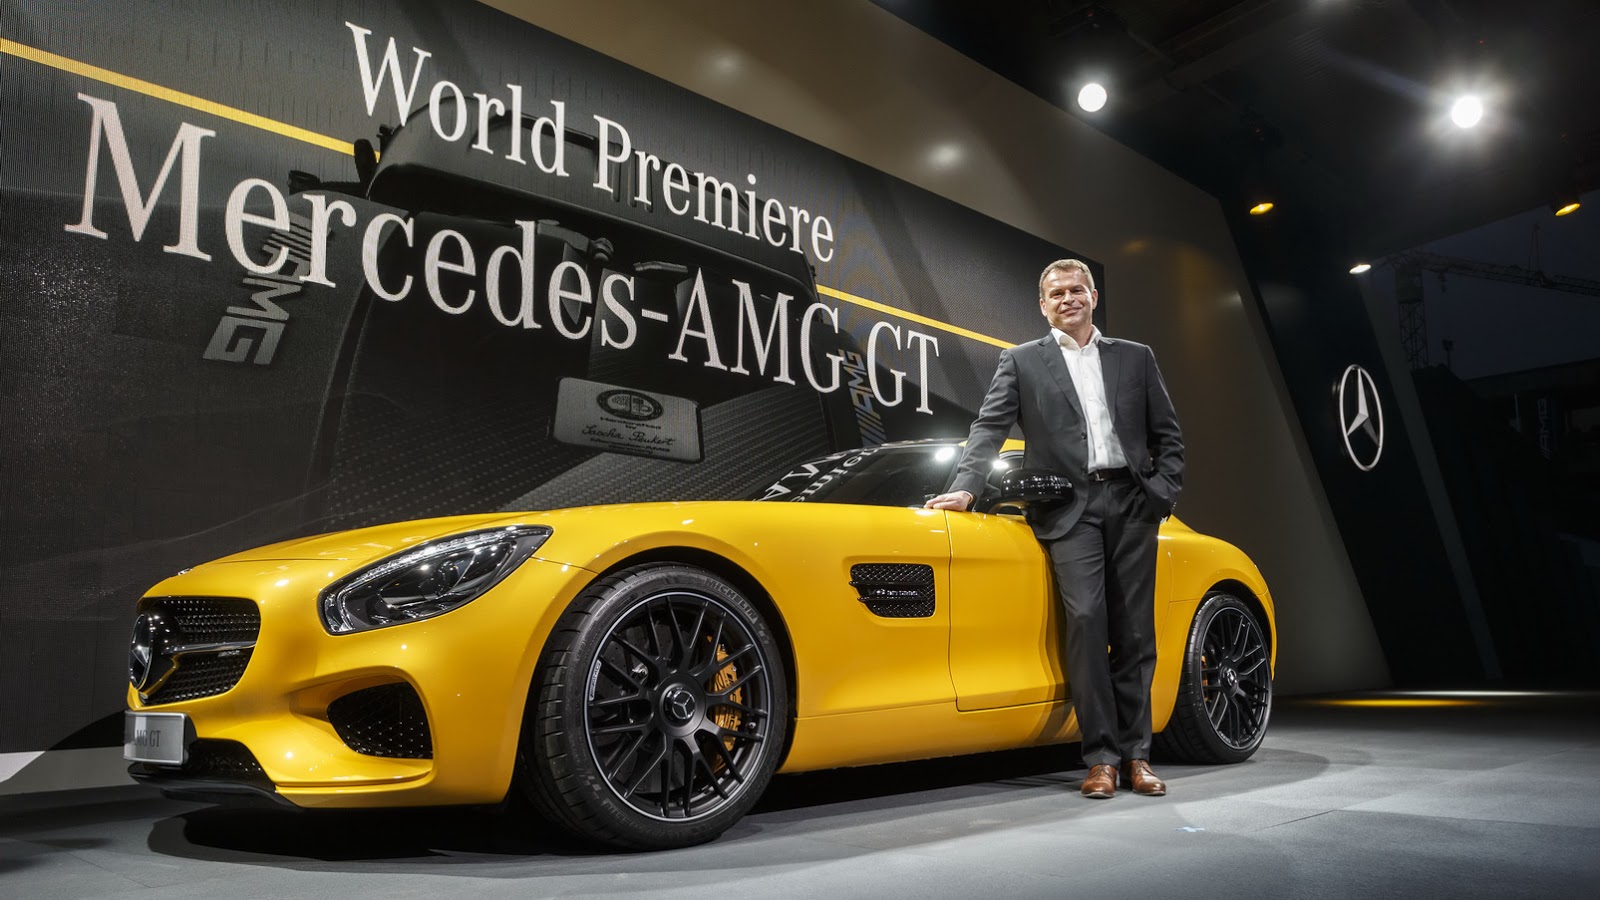 Mercedes-AMG-GT-Carscoops7